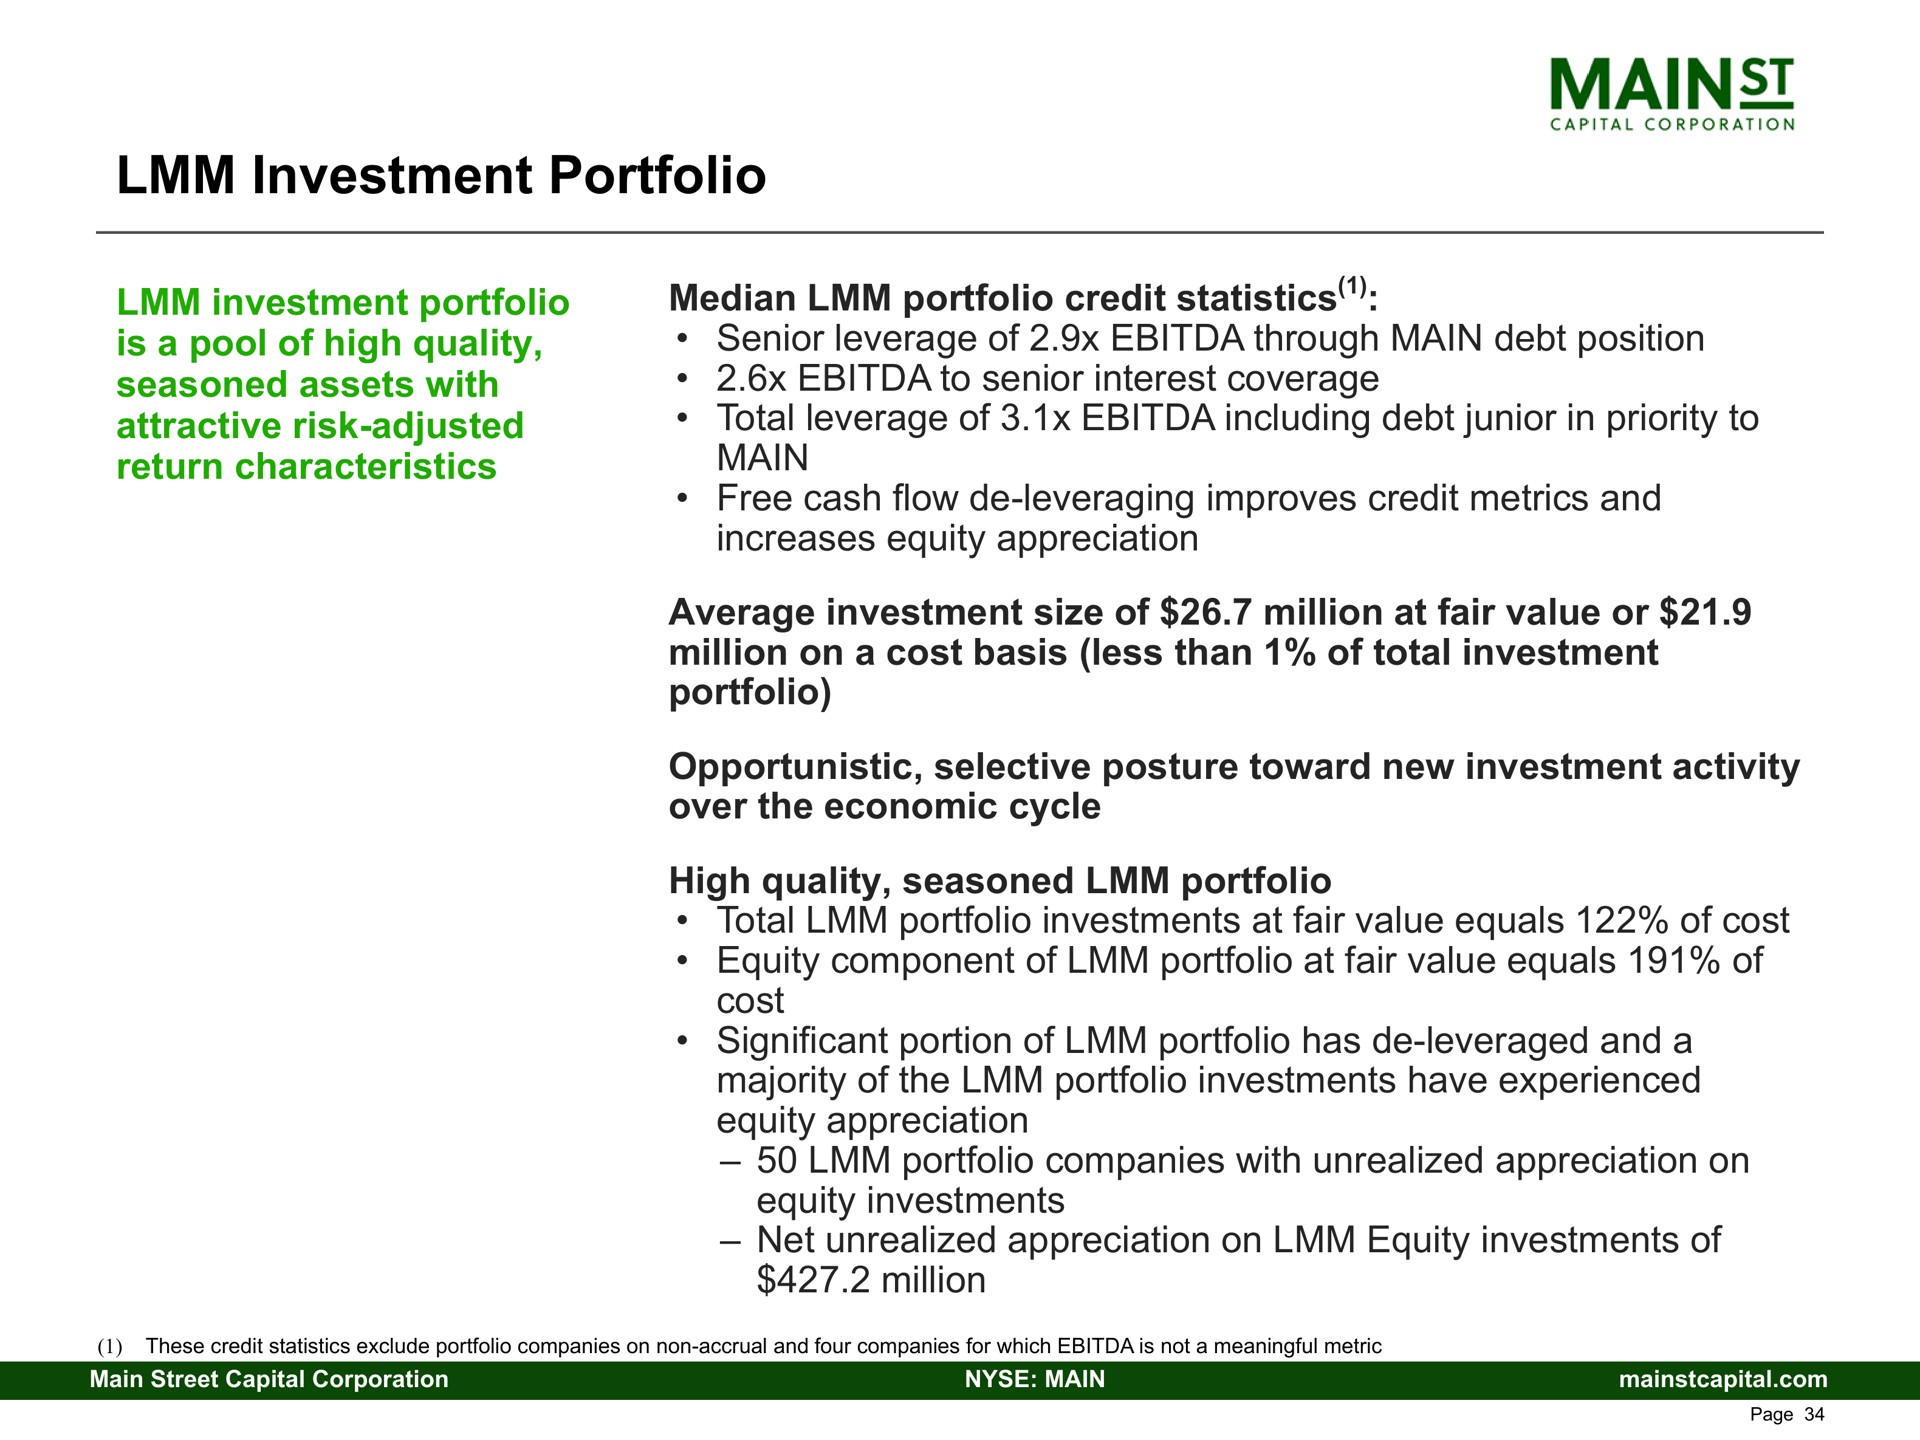 investment portfolio investment portfolio is a pool of high quality seasoned assets with attractive risk adjusted return characteristics median portfolio credit statistics senior leverage of through main debt position to senior interest coverage total leverage of including debt junior in priority to main free cash flow leveraging improves credit metrics and increases equity appreciation average investment size of million at fair value or million on a cost basis less than of total investment portfolio opportunistic selective posture toward new investment activity over the economic cycle high quality seasoned portfolio total portfolio investments at fair value equals of cost equity component of portfolio at fair value equals of cost significant portion of portfolio has leveraged and a majority of the portfolio investments have experienced equity appreciation portfolio companies with unrealized appreciation on equity investments net unrealized appreciation on equity investments of million | Main Street Capital